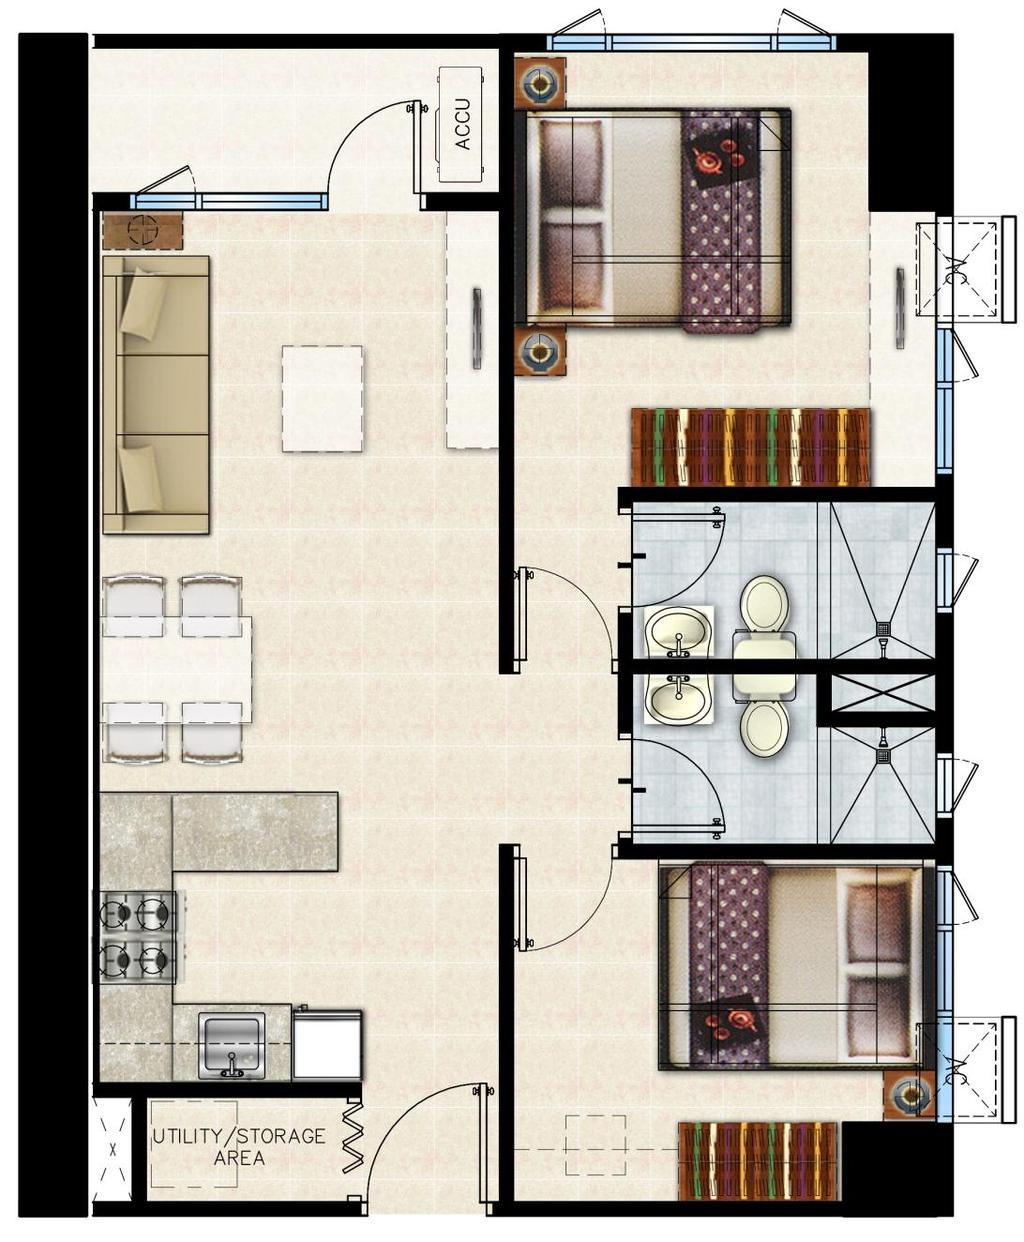 Typical Unit Layouts All Buildings: 2-BR Units w/ balcony Unit Area: Balcony Area: Total